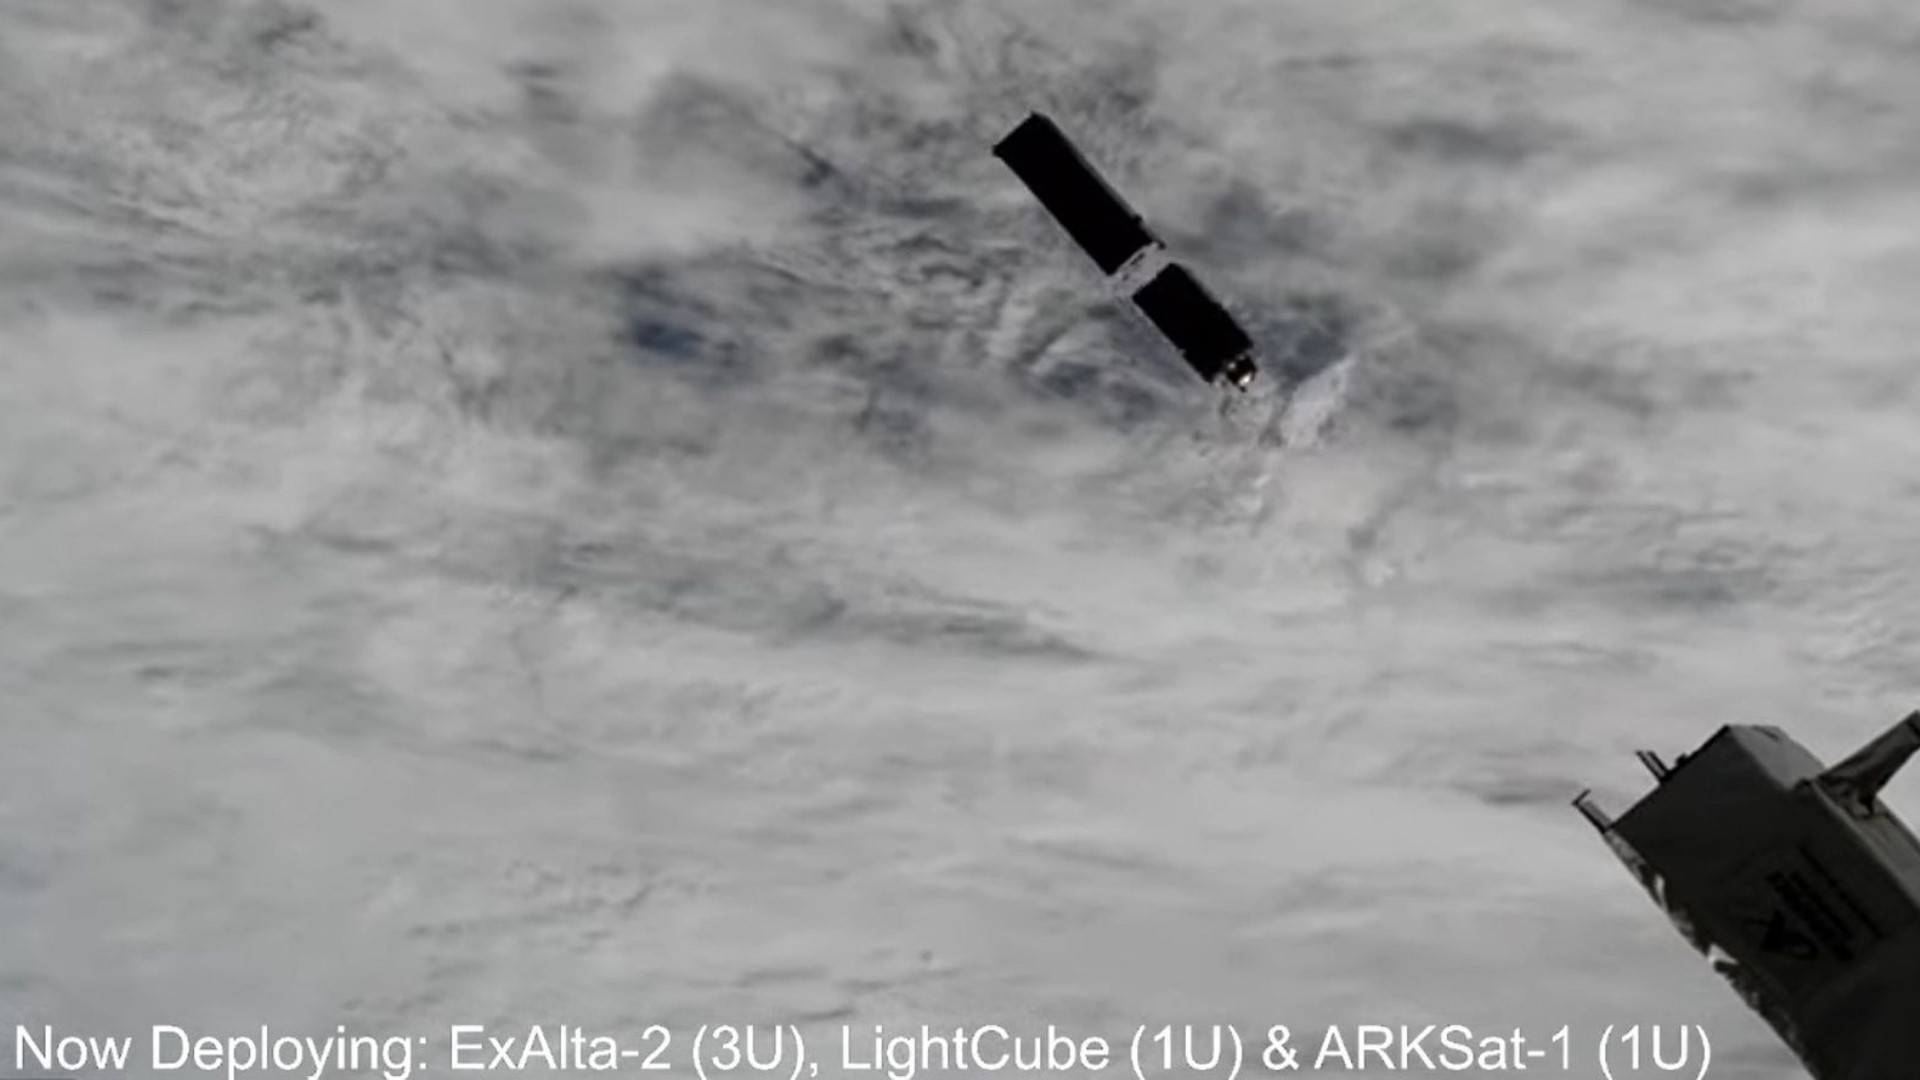 After being sent into space on a SpaceX mission, U of A's first CubeSat satellite is now in low Earth orbit to observe climate.